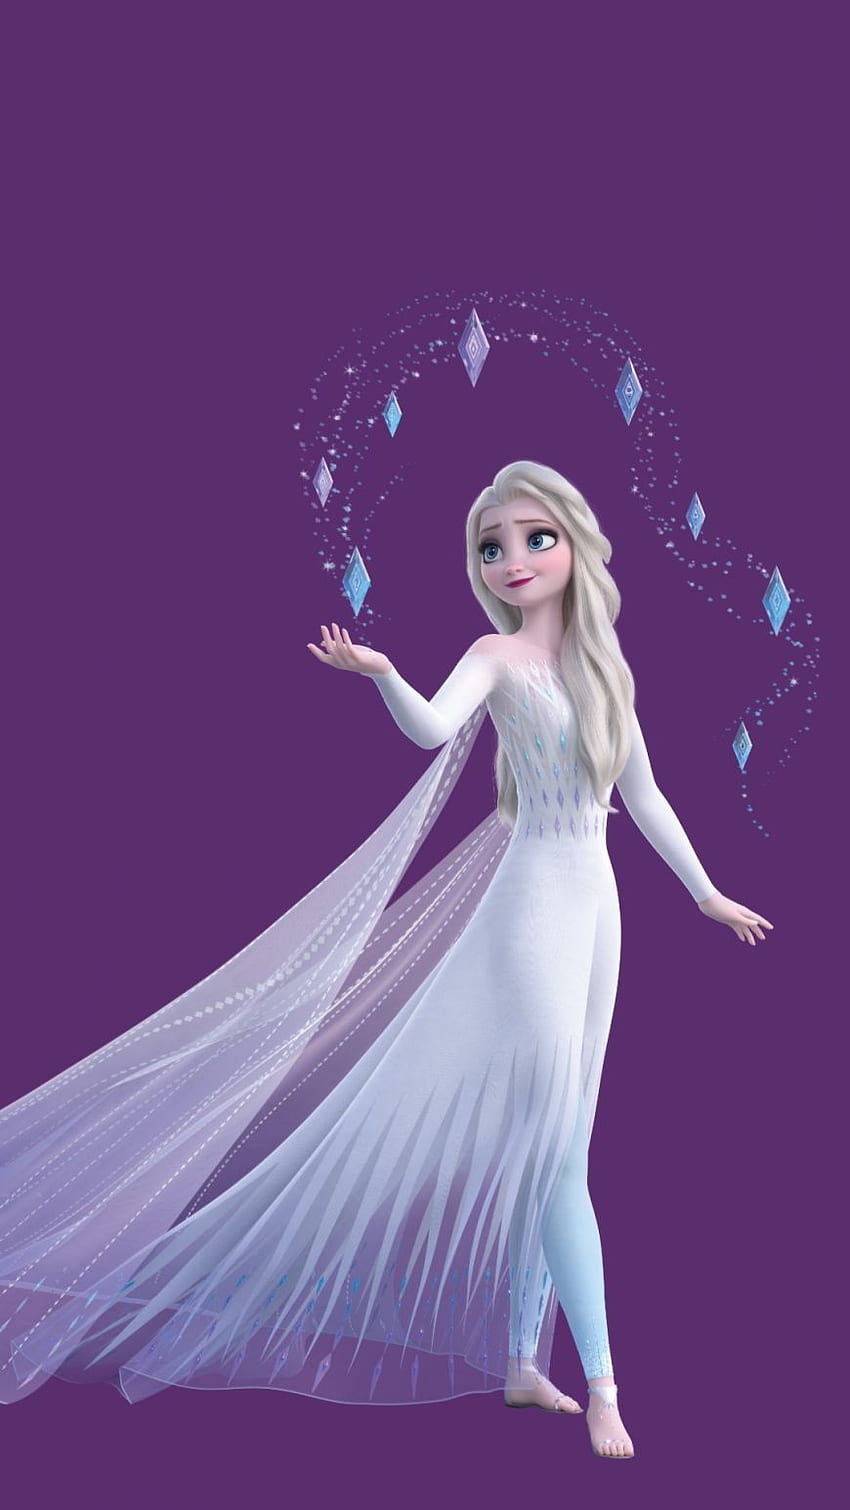 new Frozen 2 with Elsa in white dress and her, Disney Frozen HD phone wallpaper